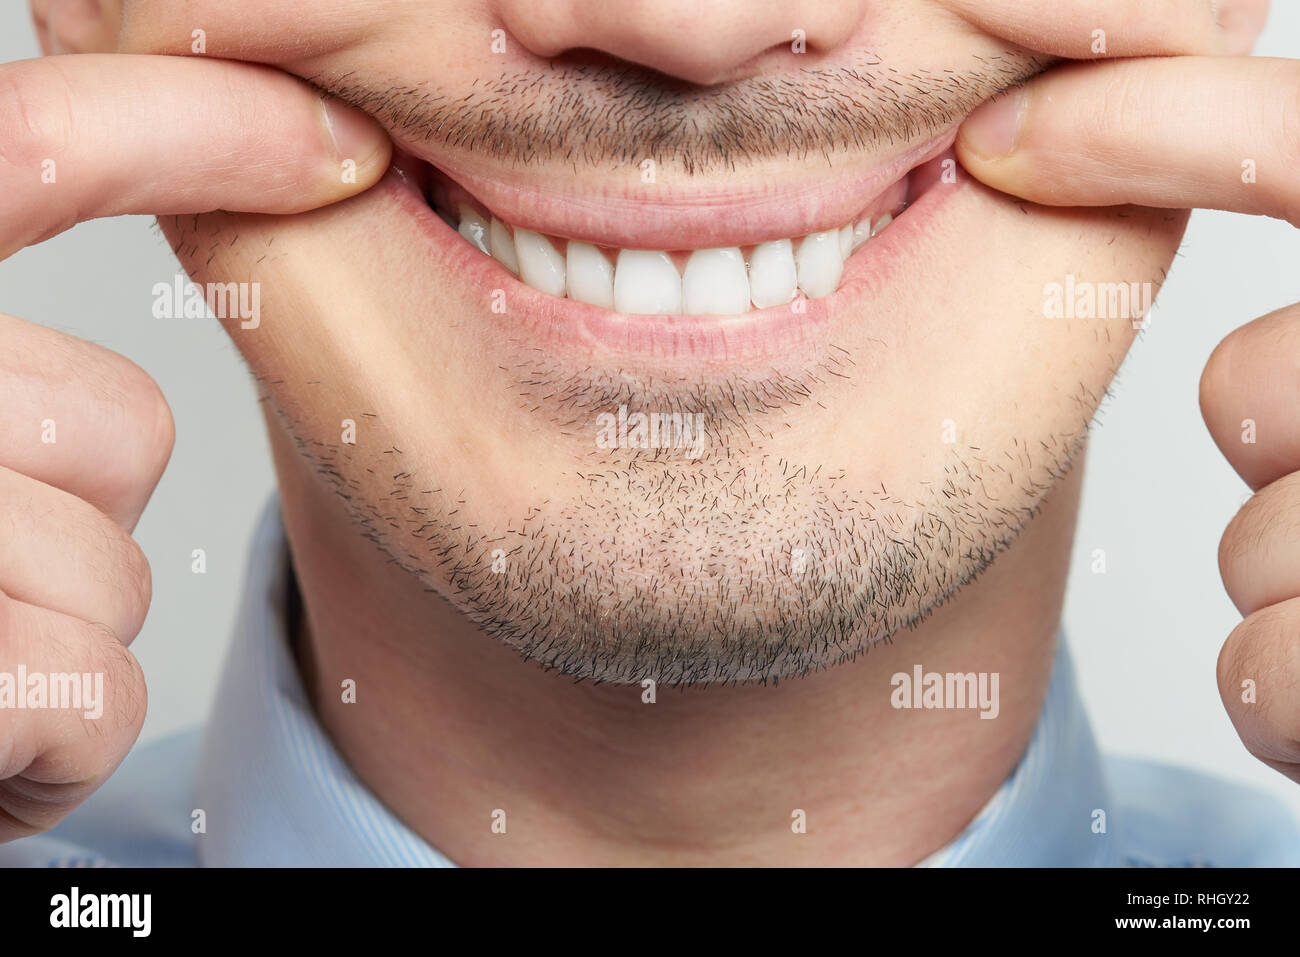 Training to make smile with teeth helping with fingers Stock Photo